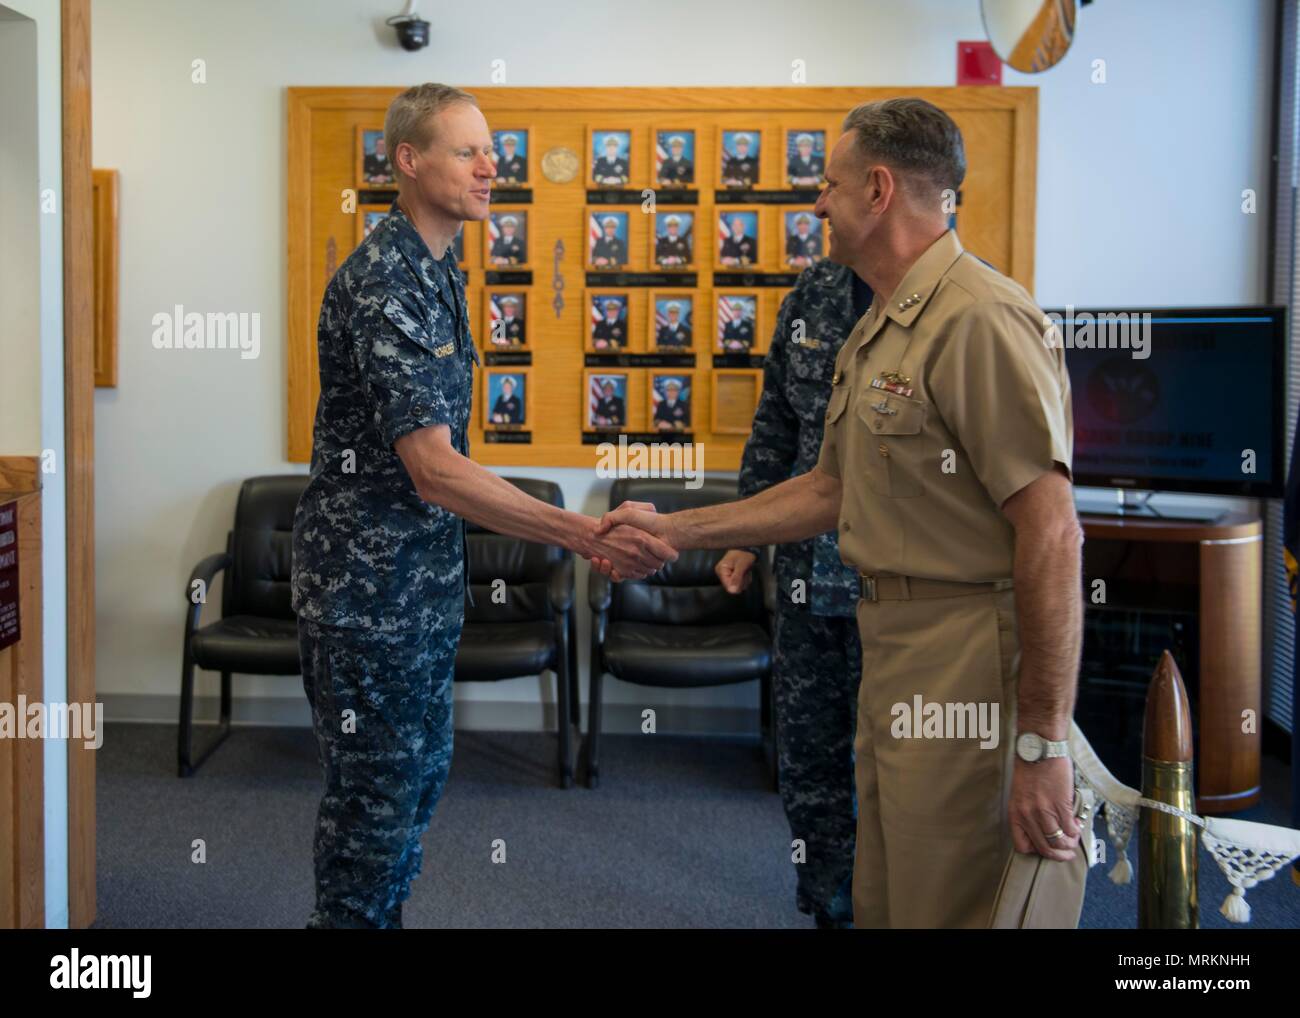 BANGOR, Wash. (June 22, 2017) Capt. Ted Schroeder, chief of staff, Submarine Group (COMSUBGRU) 9, greets Chief of Naval Personnel Vice Adm. Robert Burke on the quarterdeck of COMSUBGRU-9 while visiting Naval Base Kitsap (NBK) Bangor. During his visit, he conducted four separate all hands calls at NBK Bangor and NBK Bremerton to answer Sailor’s questions. (U.S. Navy photo by Mass Communication Specialist 1st Class Amanda R. Gray/Released) Stock Photo